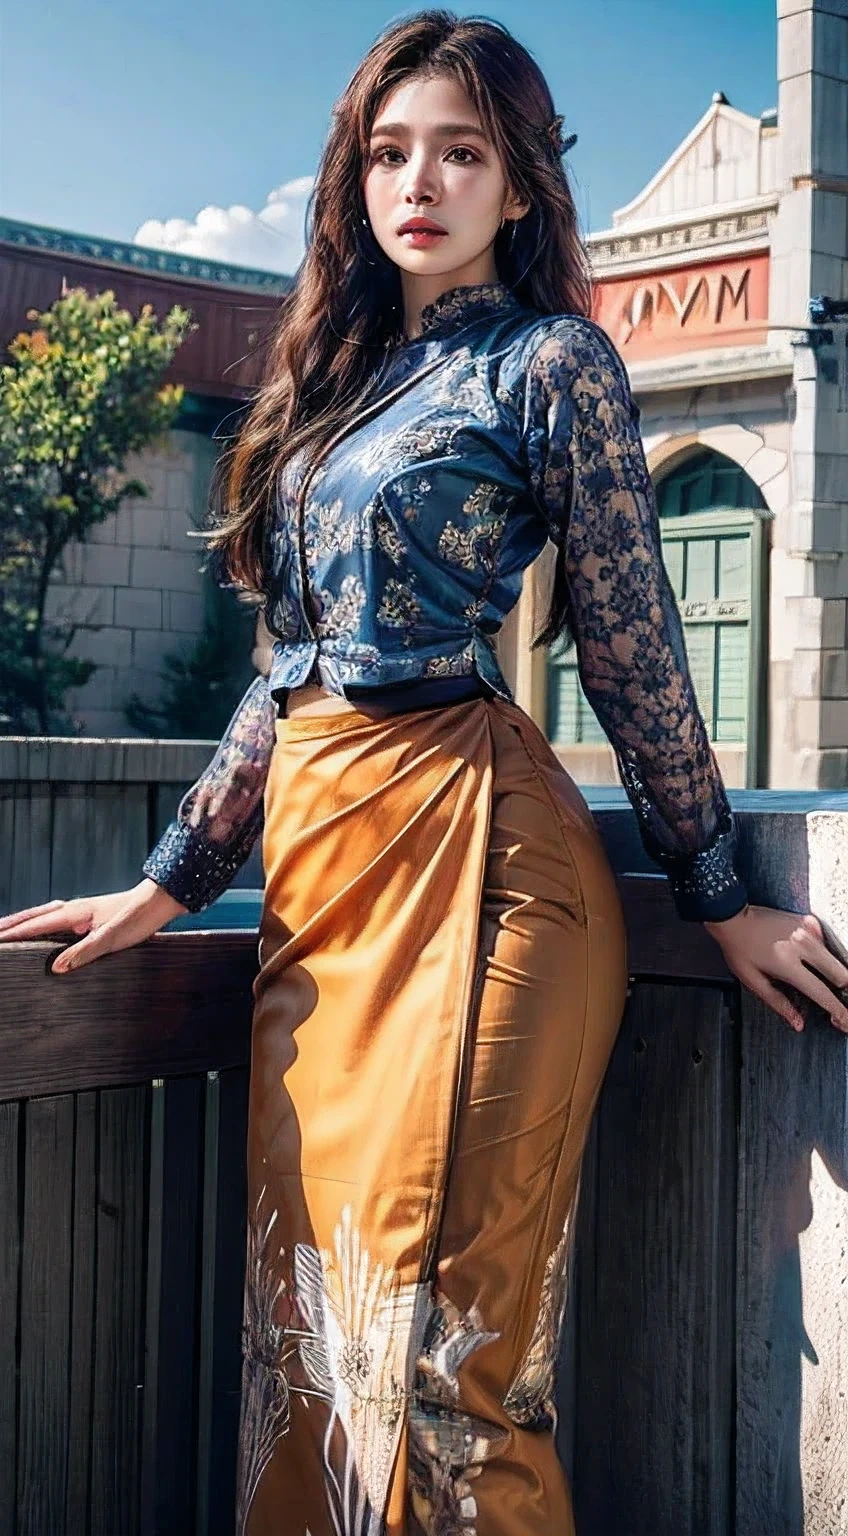 masterpiece, best quality, high resolution, realistic, Photorealistic, highly detailed, 1 woman, long hair, standing, jewelry, acmm ls outfit, wearing acmm top, orange acmm top, long sleeves, wearing acmm long skirt, orange acmm long skirt, printed skirt, sun light, 8k